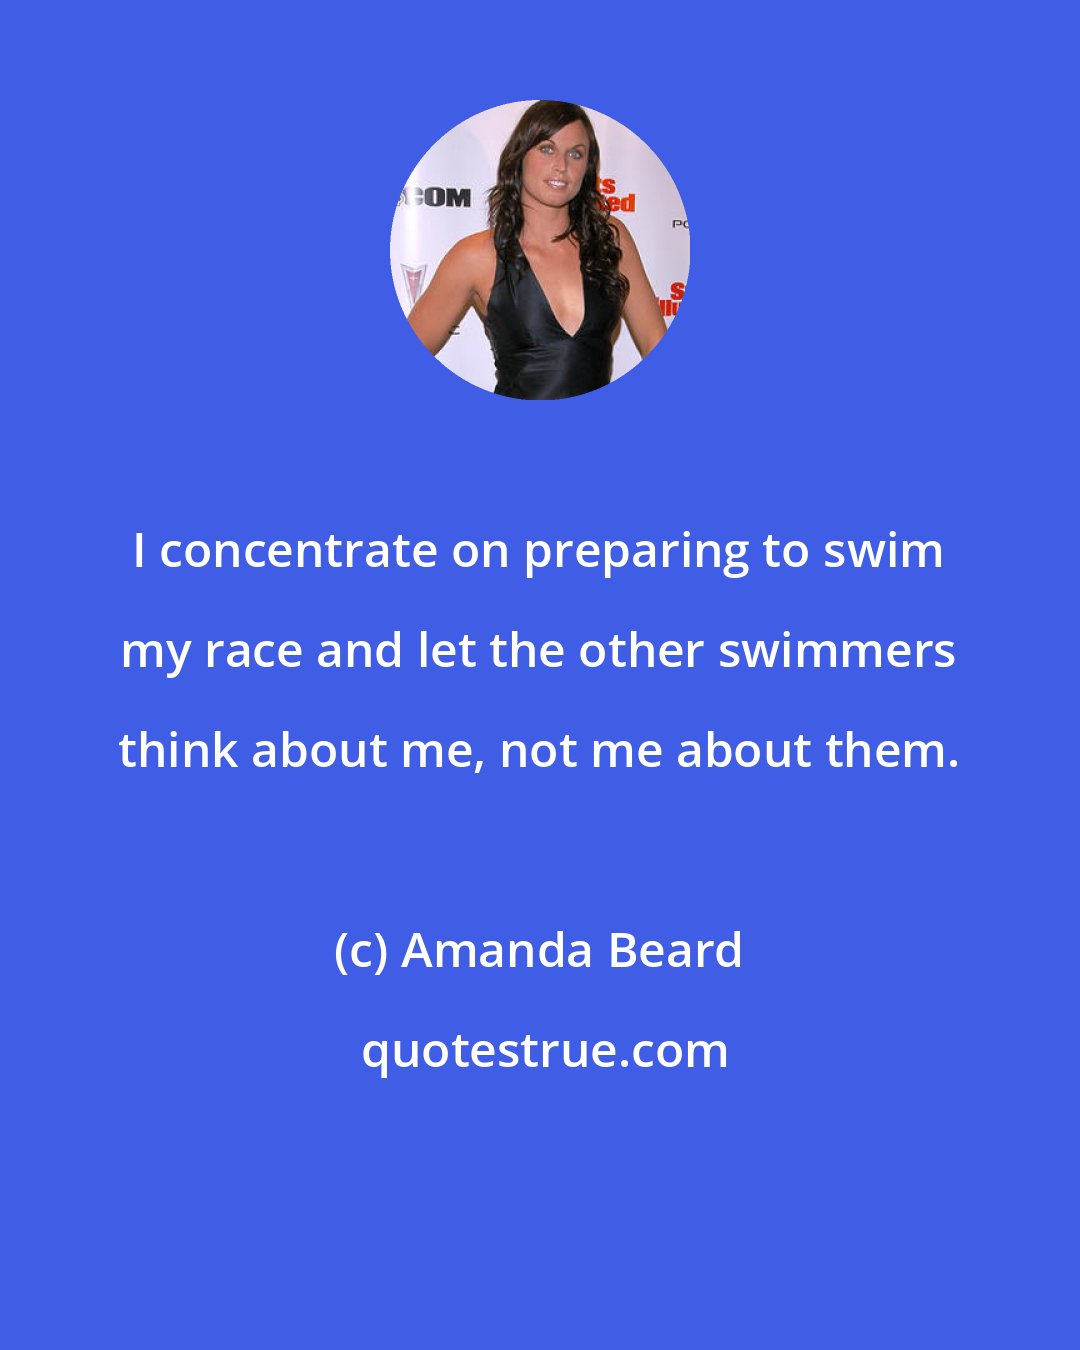 Amanda Beard: I concentrate on preparing to swim my race and let the other swimmers think about me, not me about them.